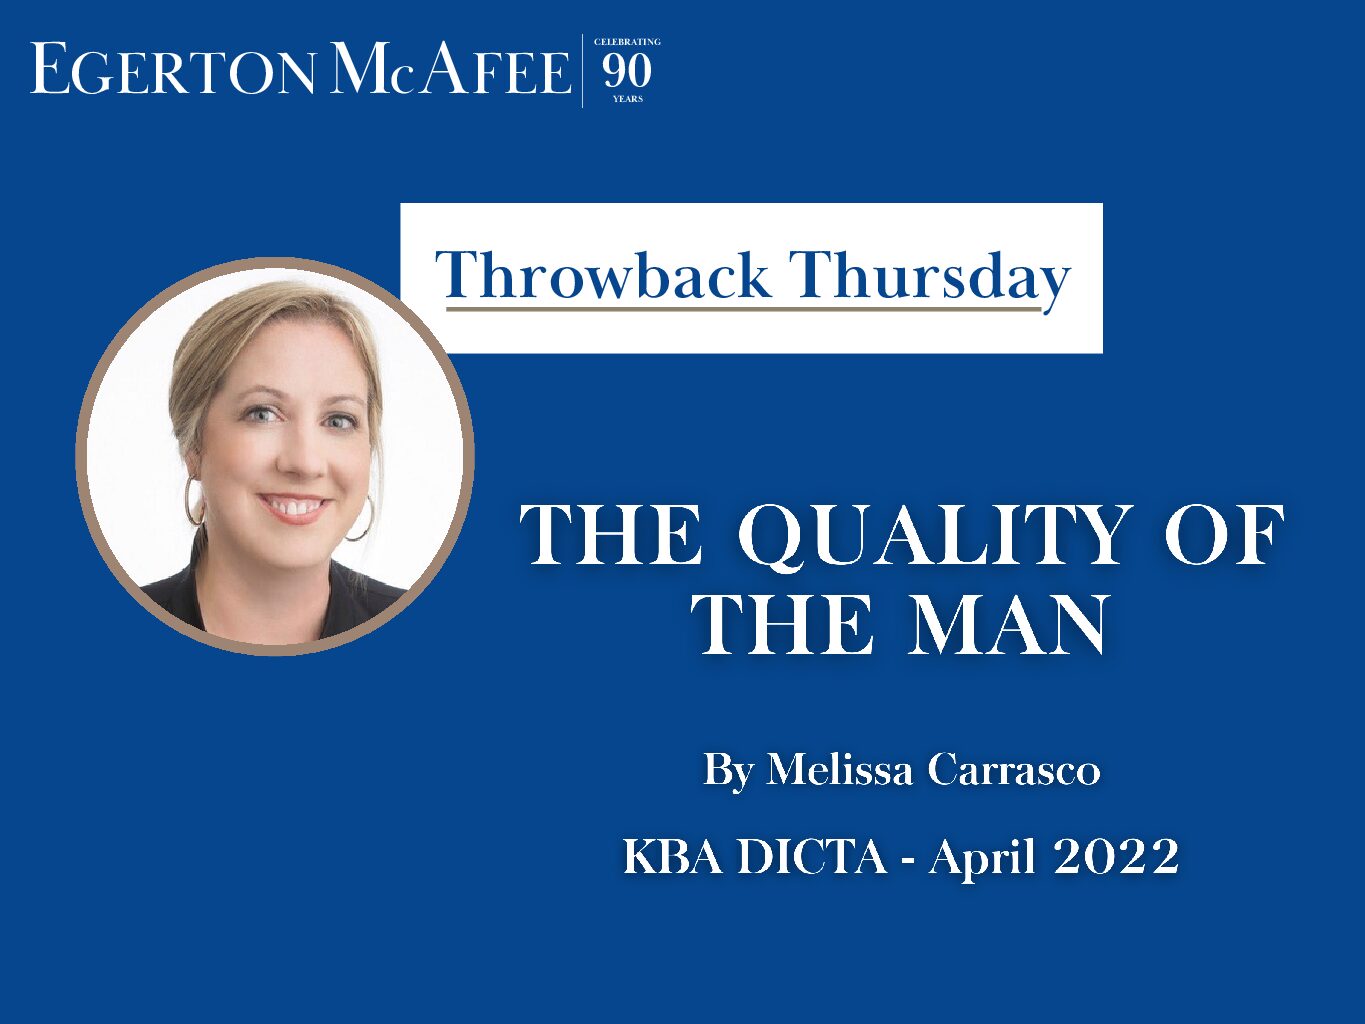 Throwback Thursday – THE QUALITY OF THE MAN by Melissa Carrasco